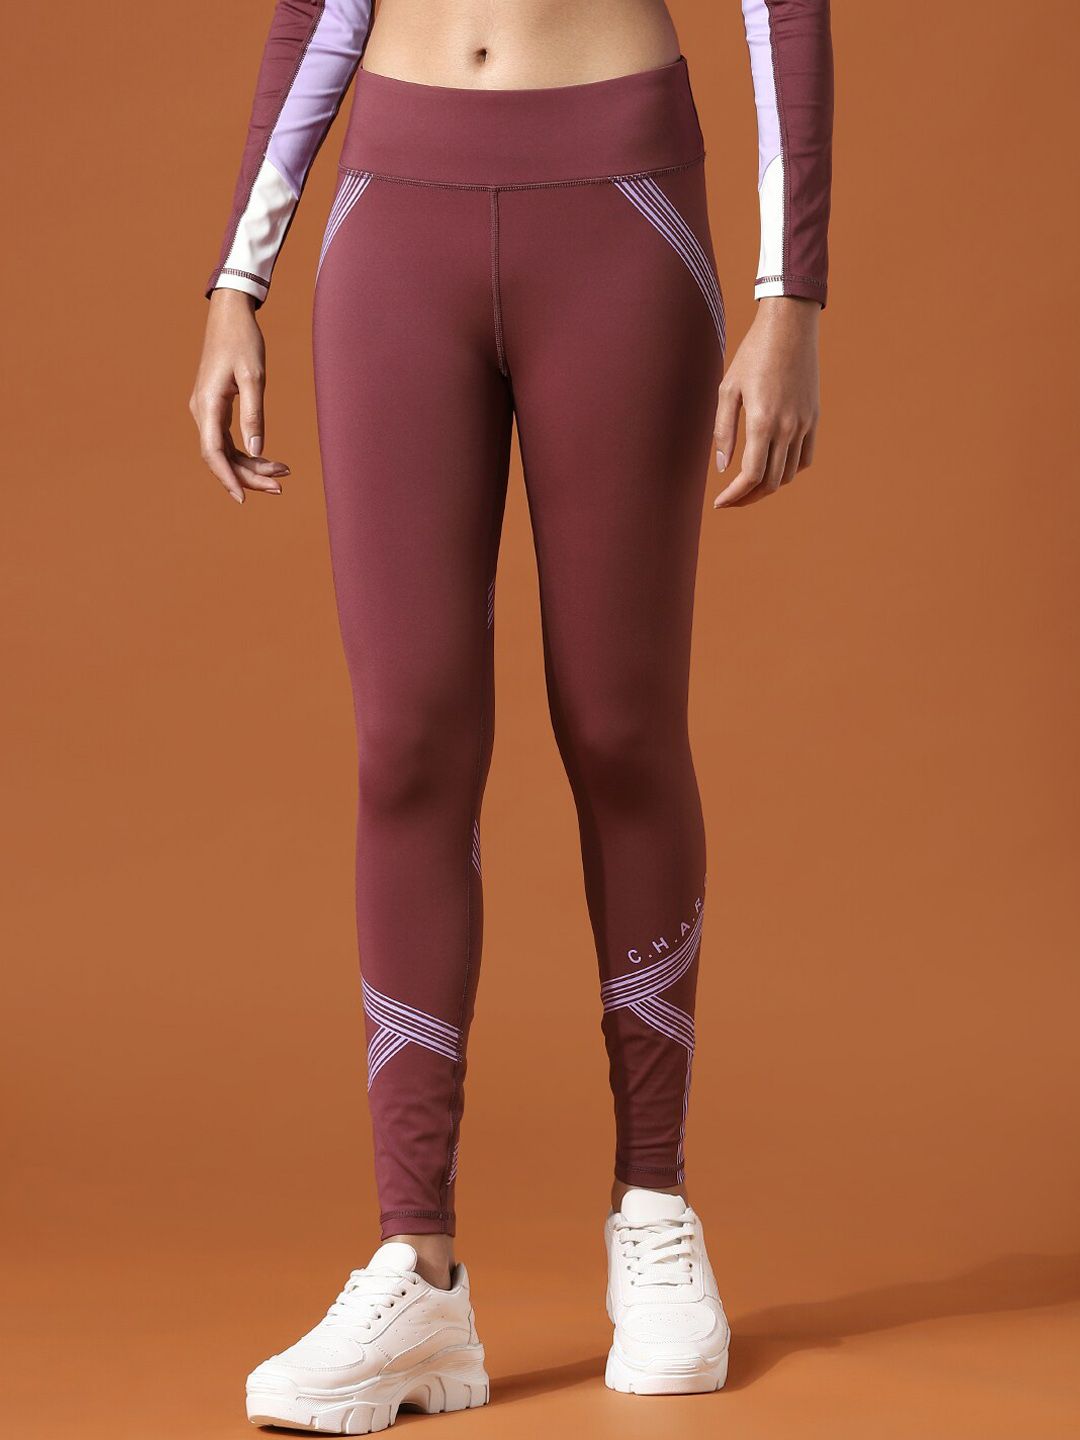 ONLY PLAY Women Maroon Red Printed Tights Price in India